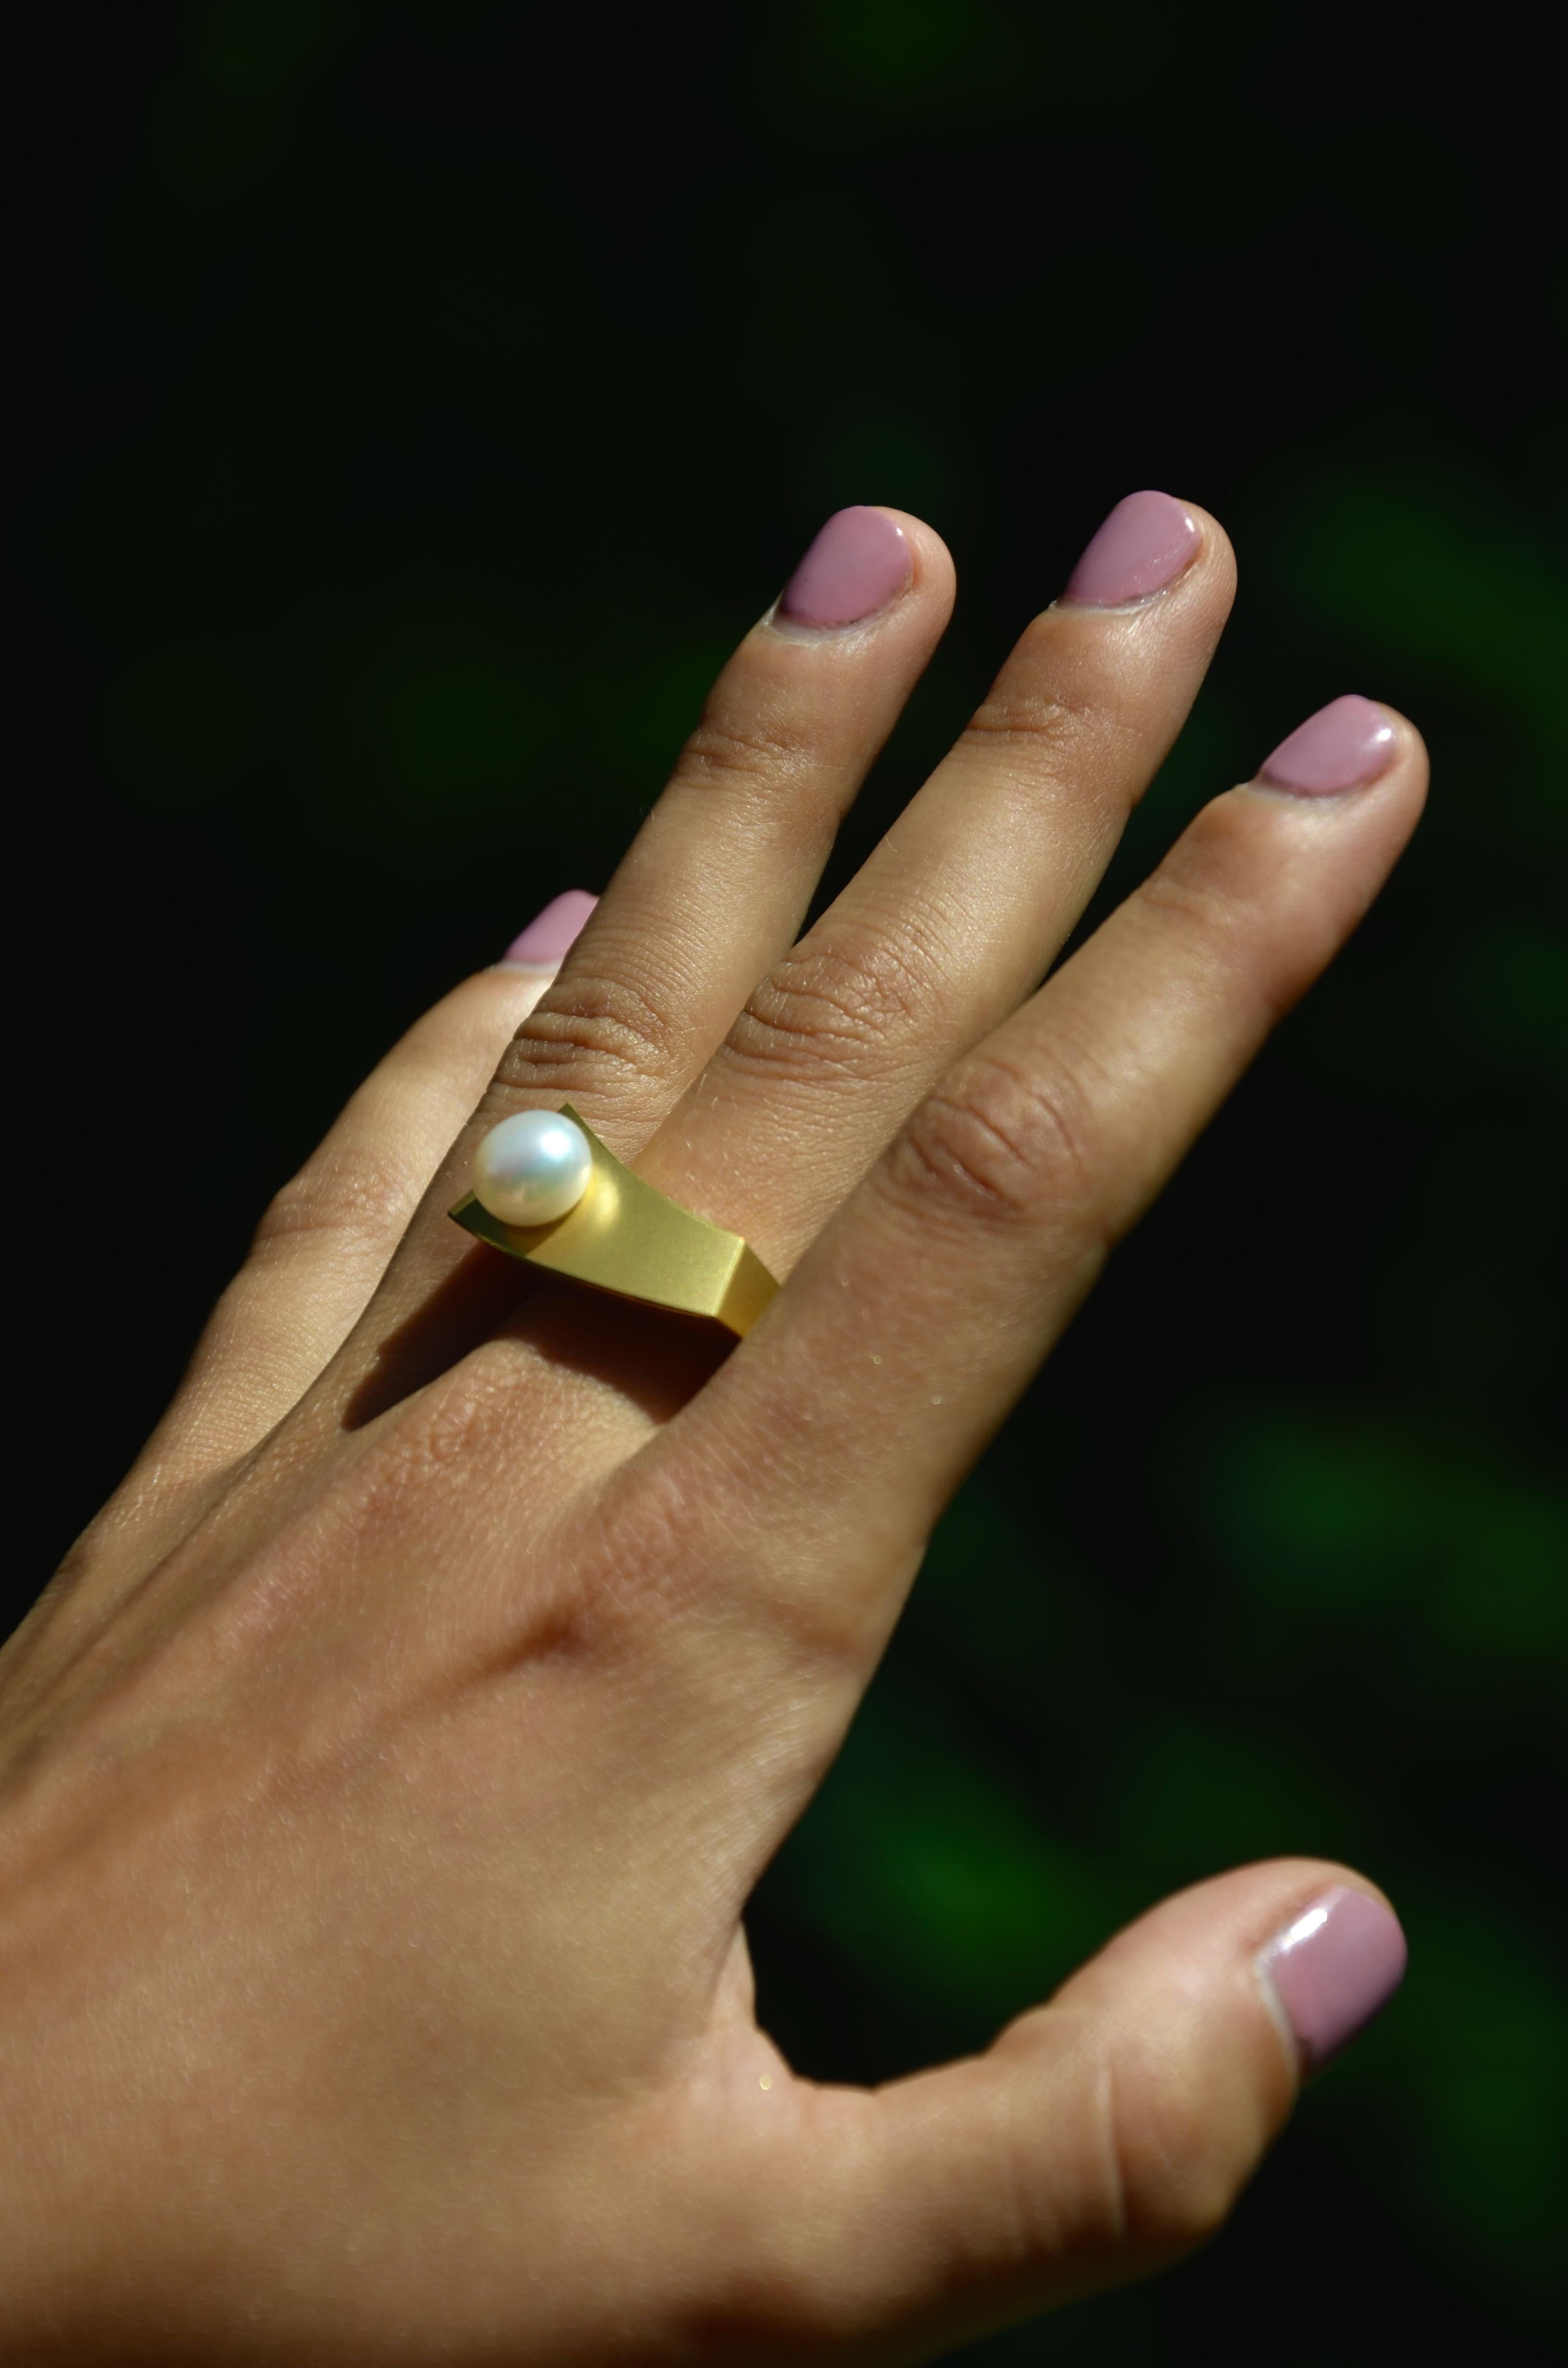 18 Karat Yellow Gold Freshwater Pearl Cocktail Ring

By Arno Schneider, wavey clear structure giving this perfect pearl the stage to shine in her brightest light. Following these lines is like a mediation, calming and exciting, connecting opposing